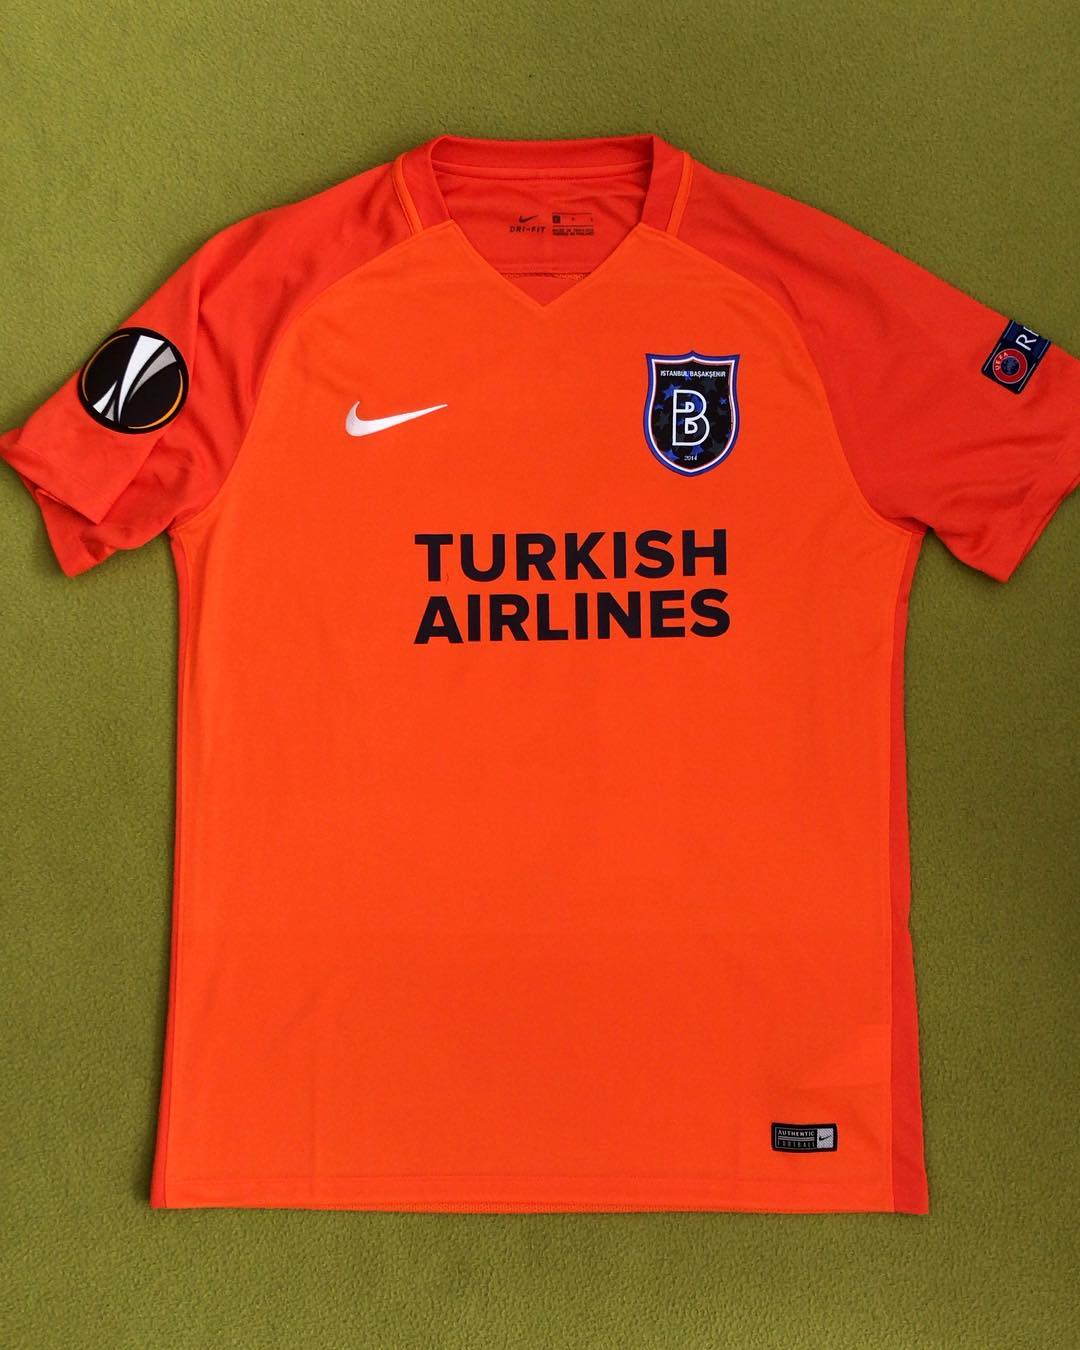 Basaksehir Istanbul Macron 2018/19 Home Match Jersey Official Licensed